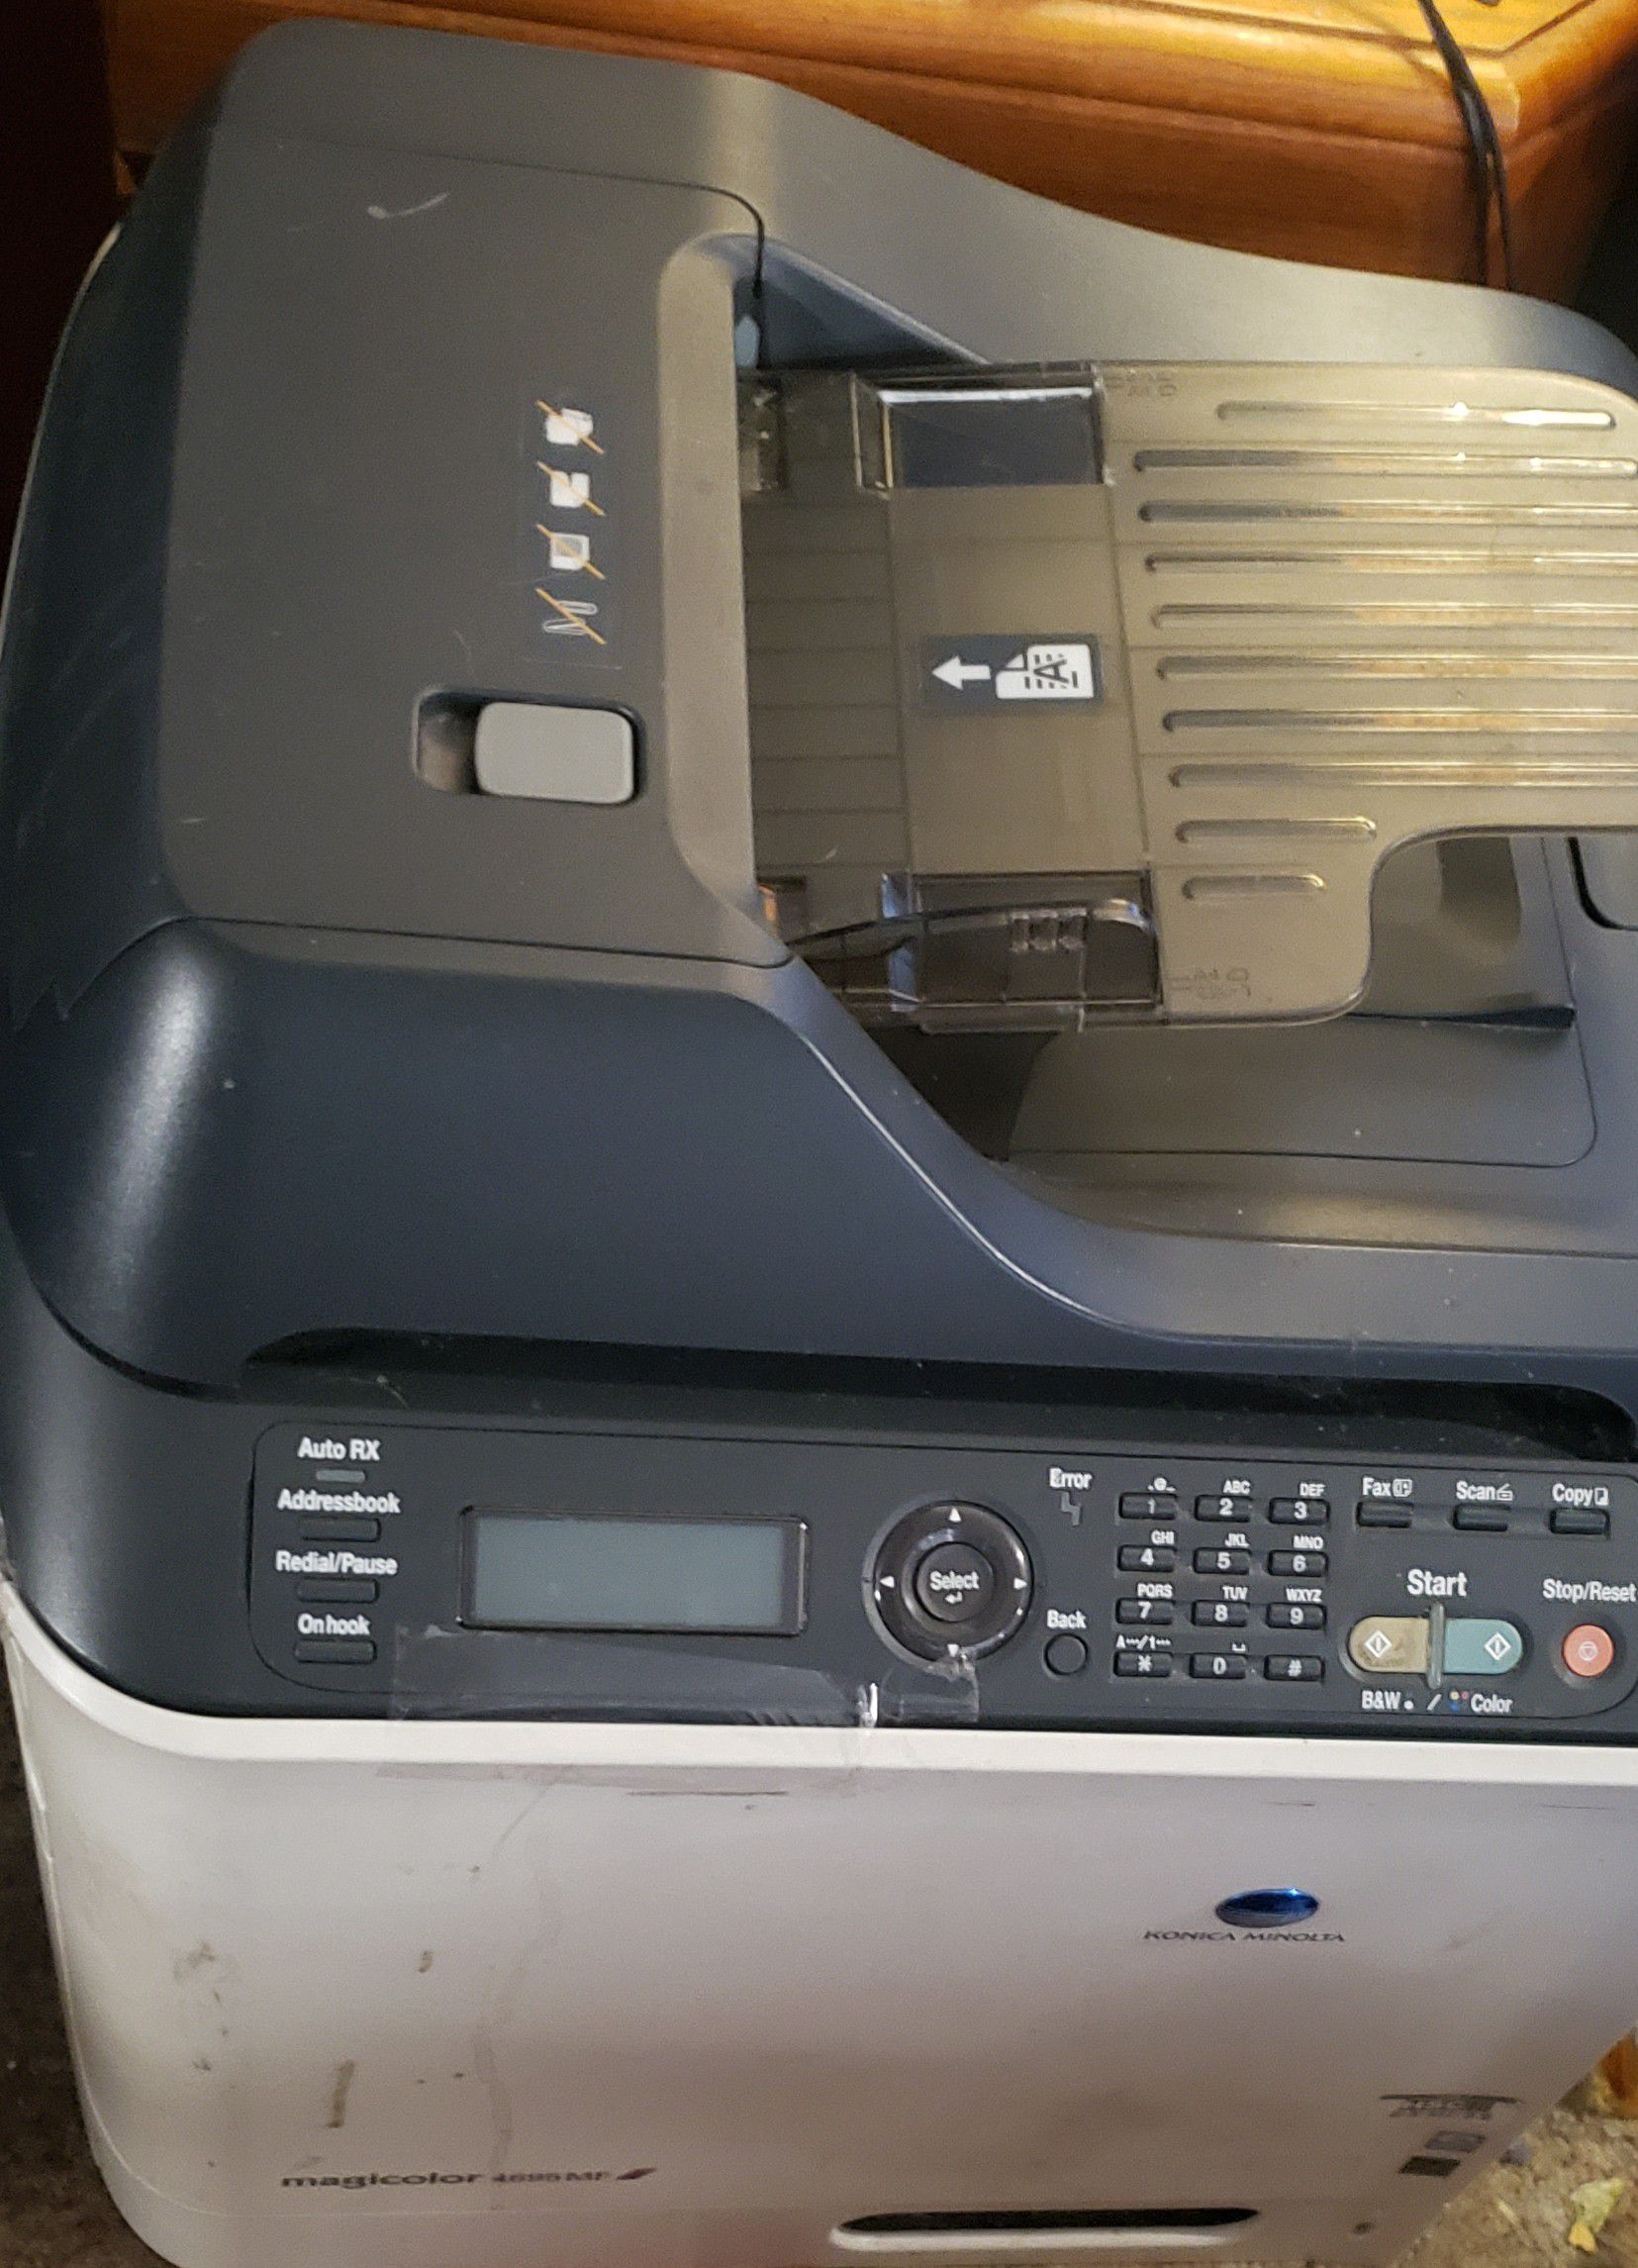 FREE copier NEEDS image rollers or $12 chip set to reset them.